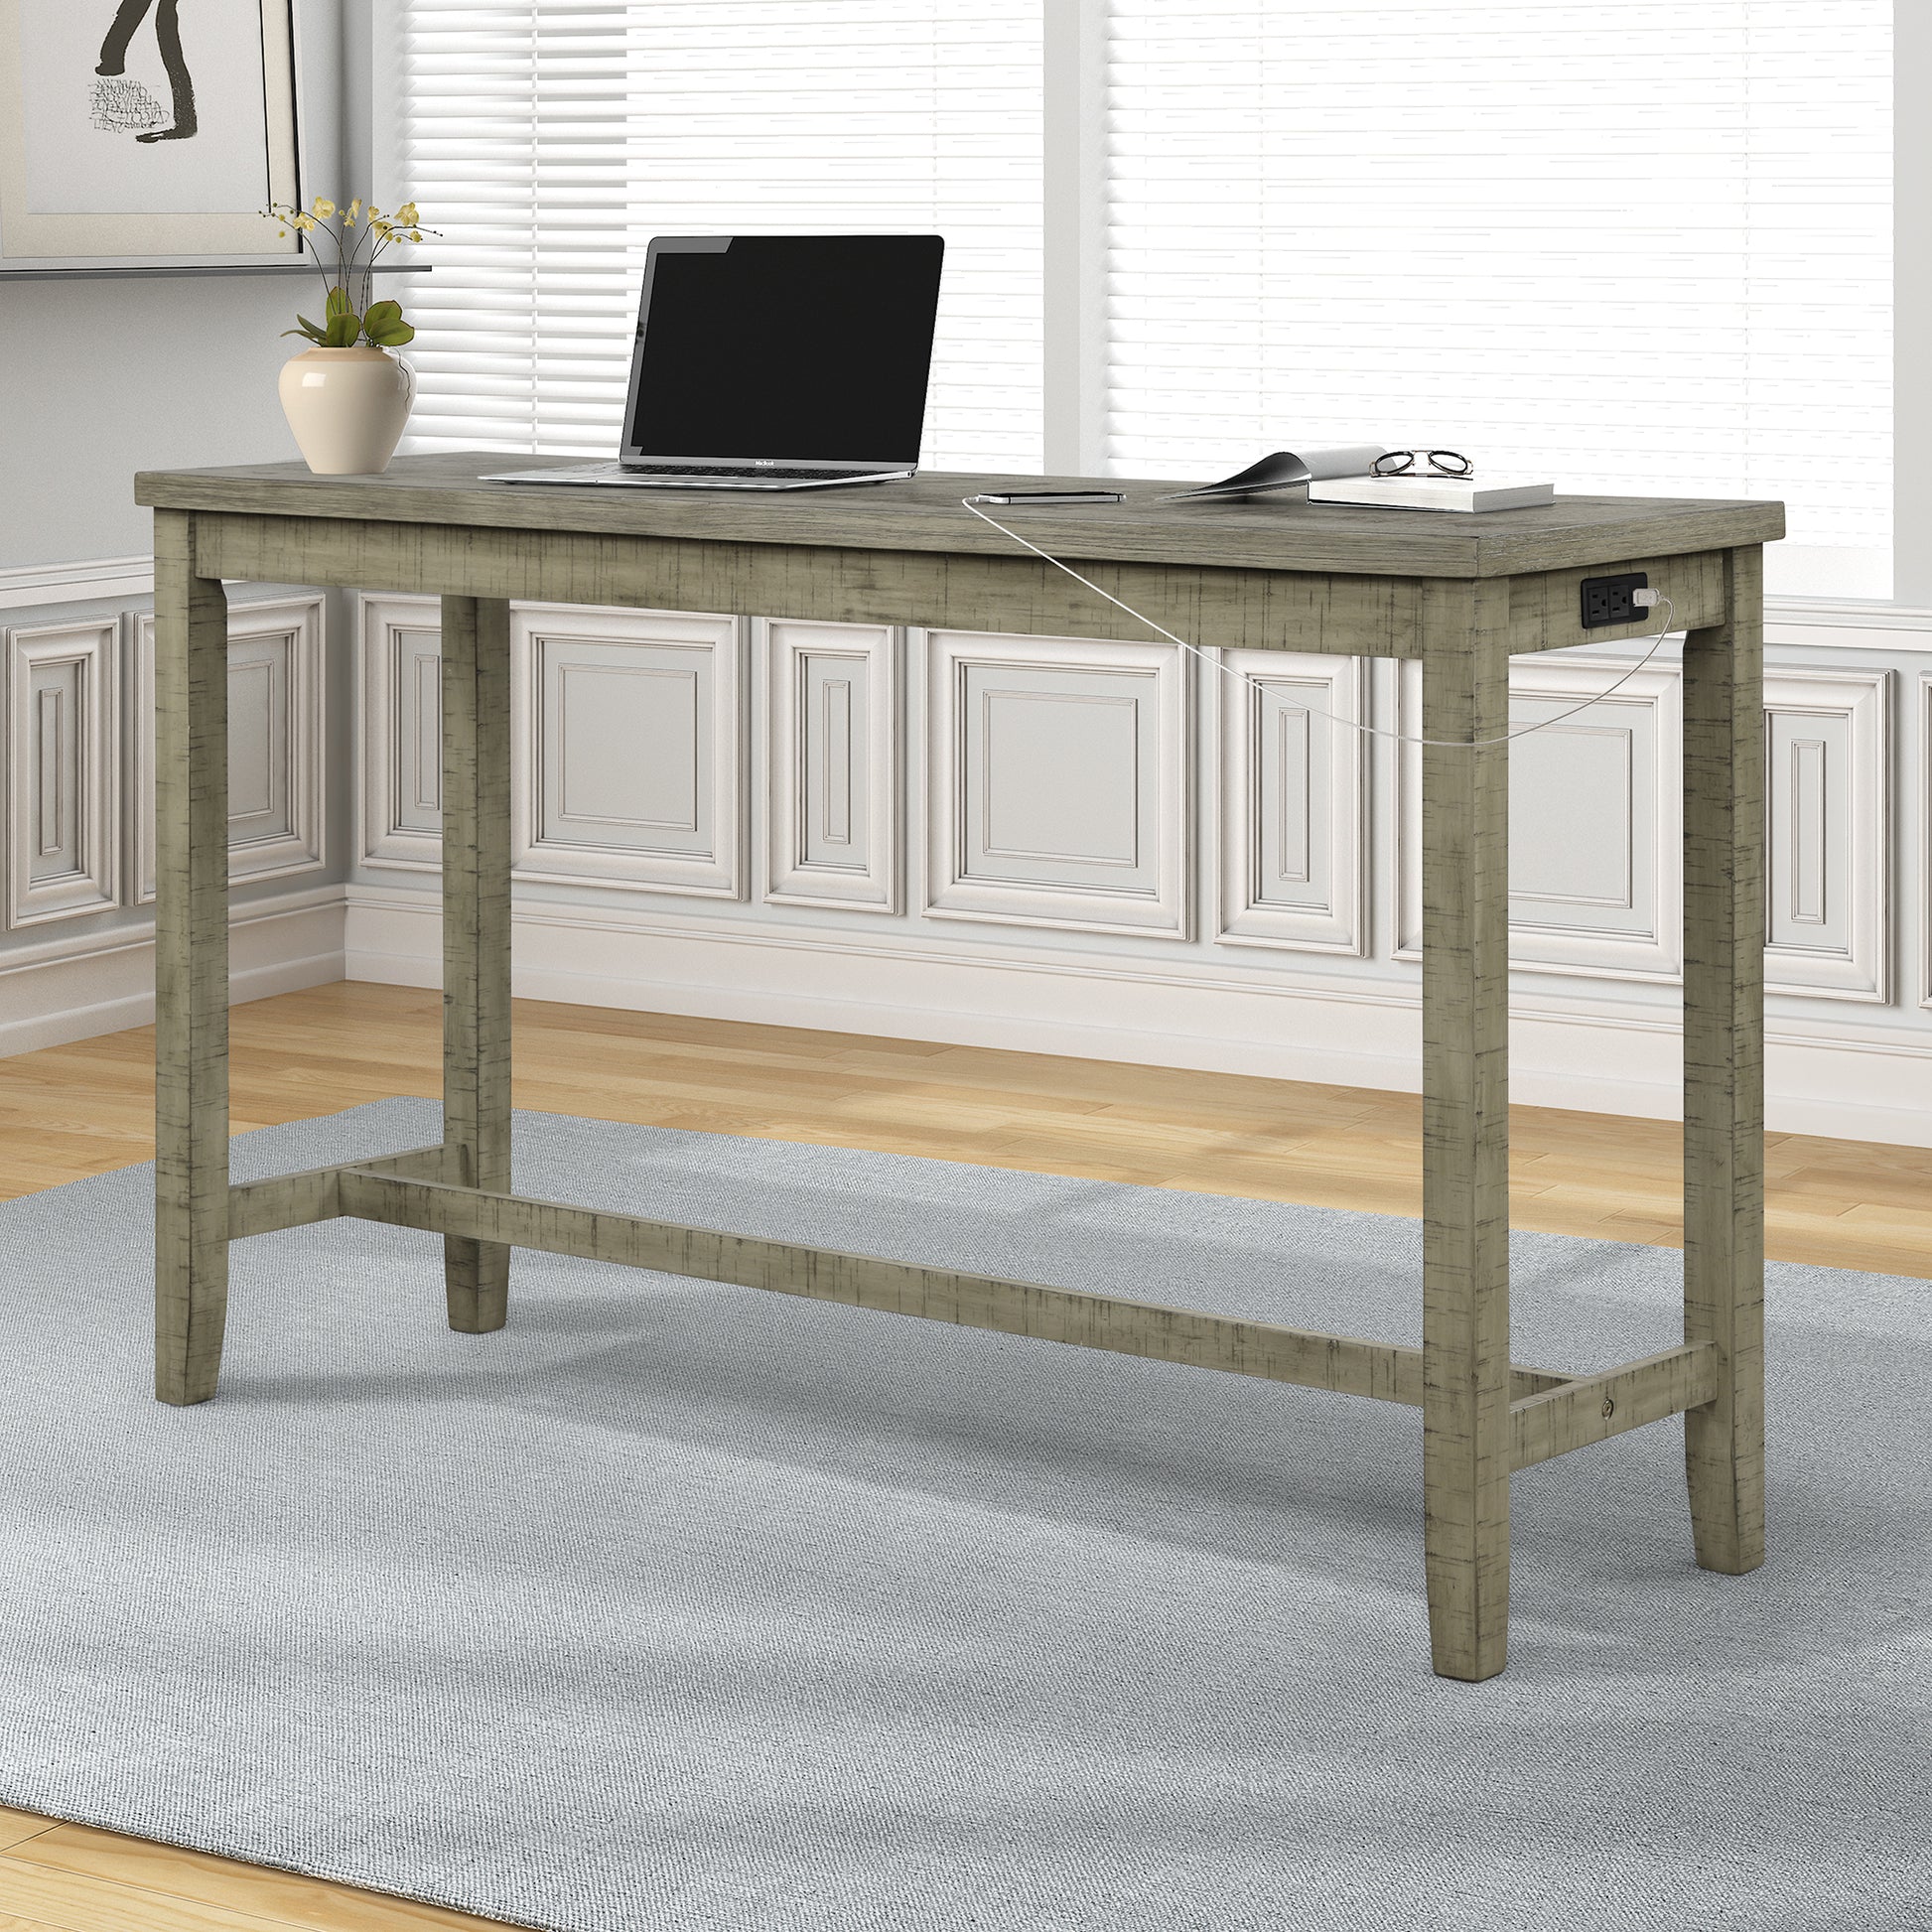 4 Piece Counter Height Table with Fabric Padded Stools